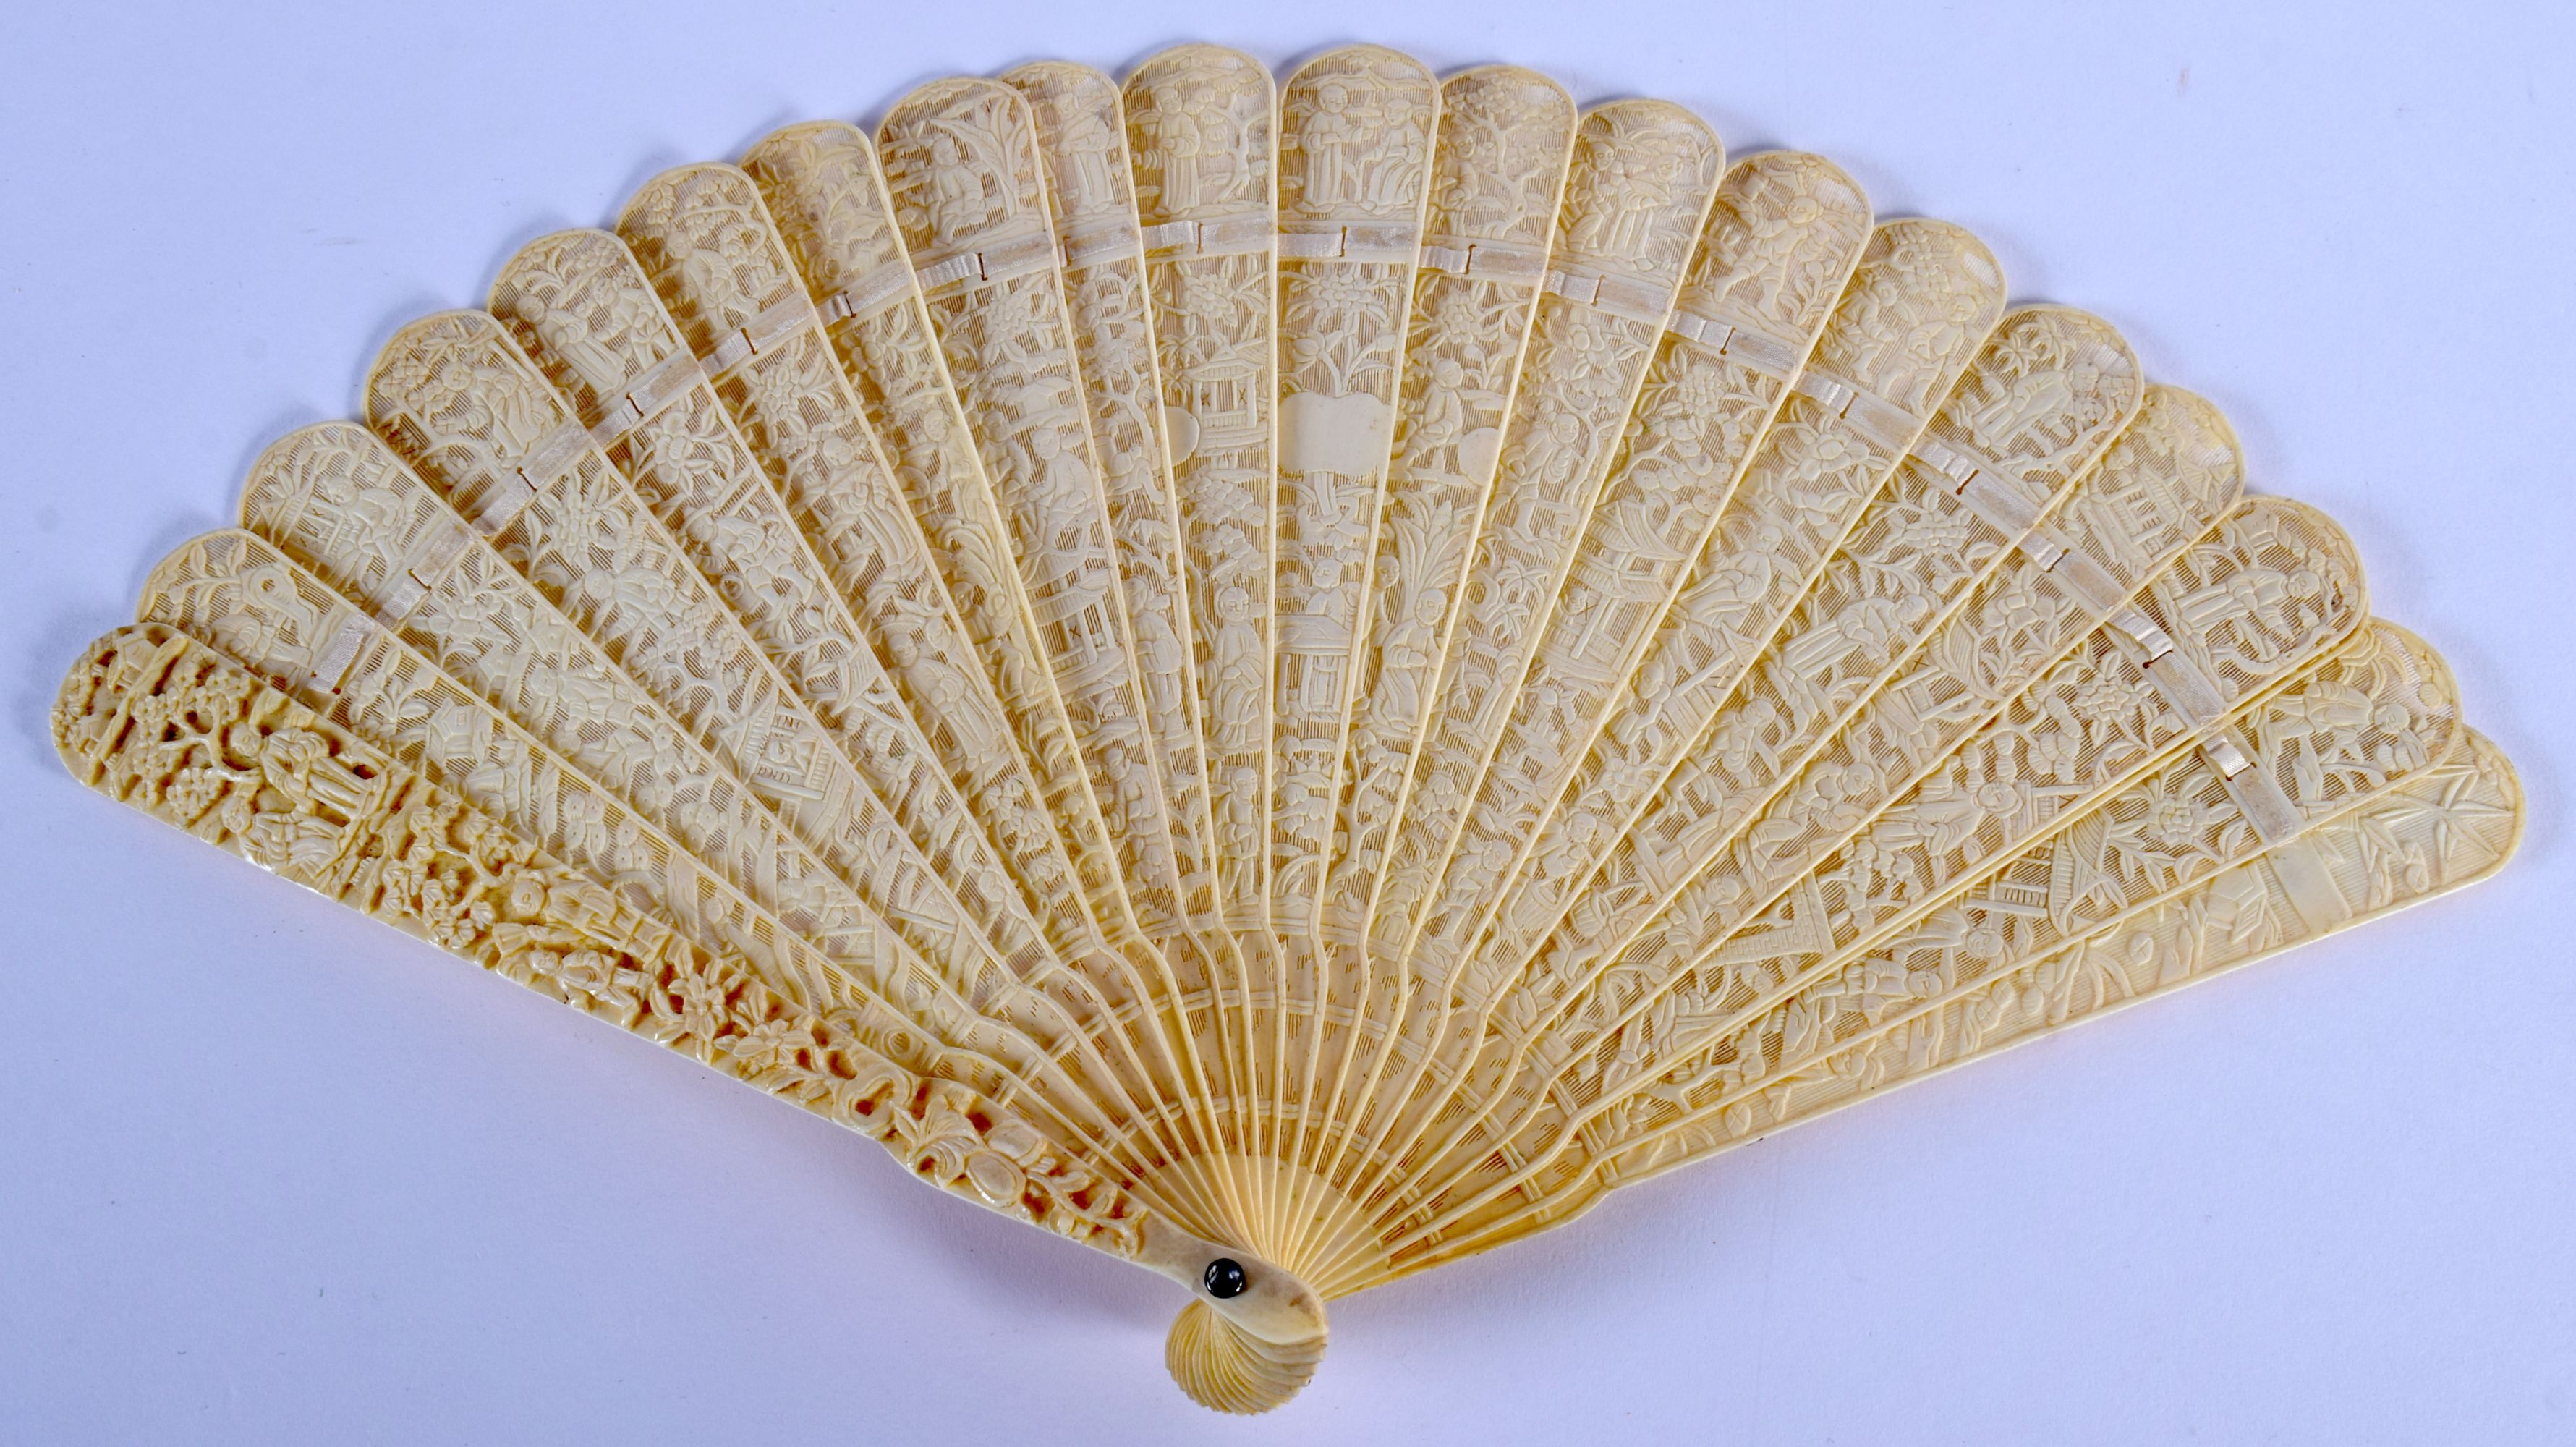 A FINE 19TH CENTURY CHINESE CARVED IVORY BRISE FAN C1840 decorated with figures. 30 cm wide extended - Image 5 of 17